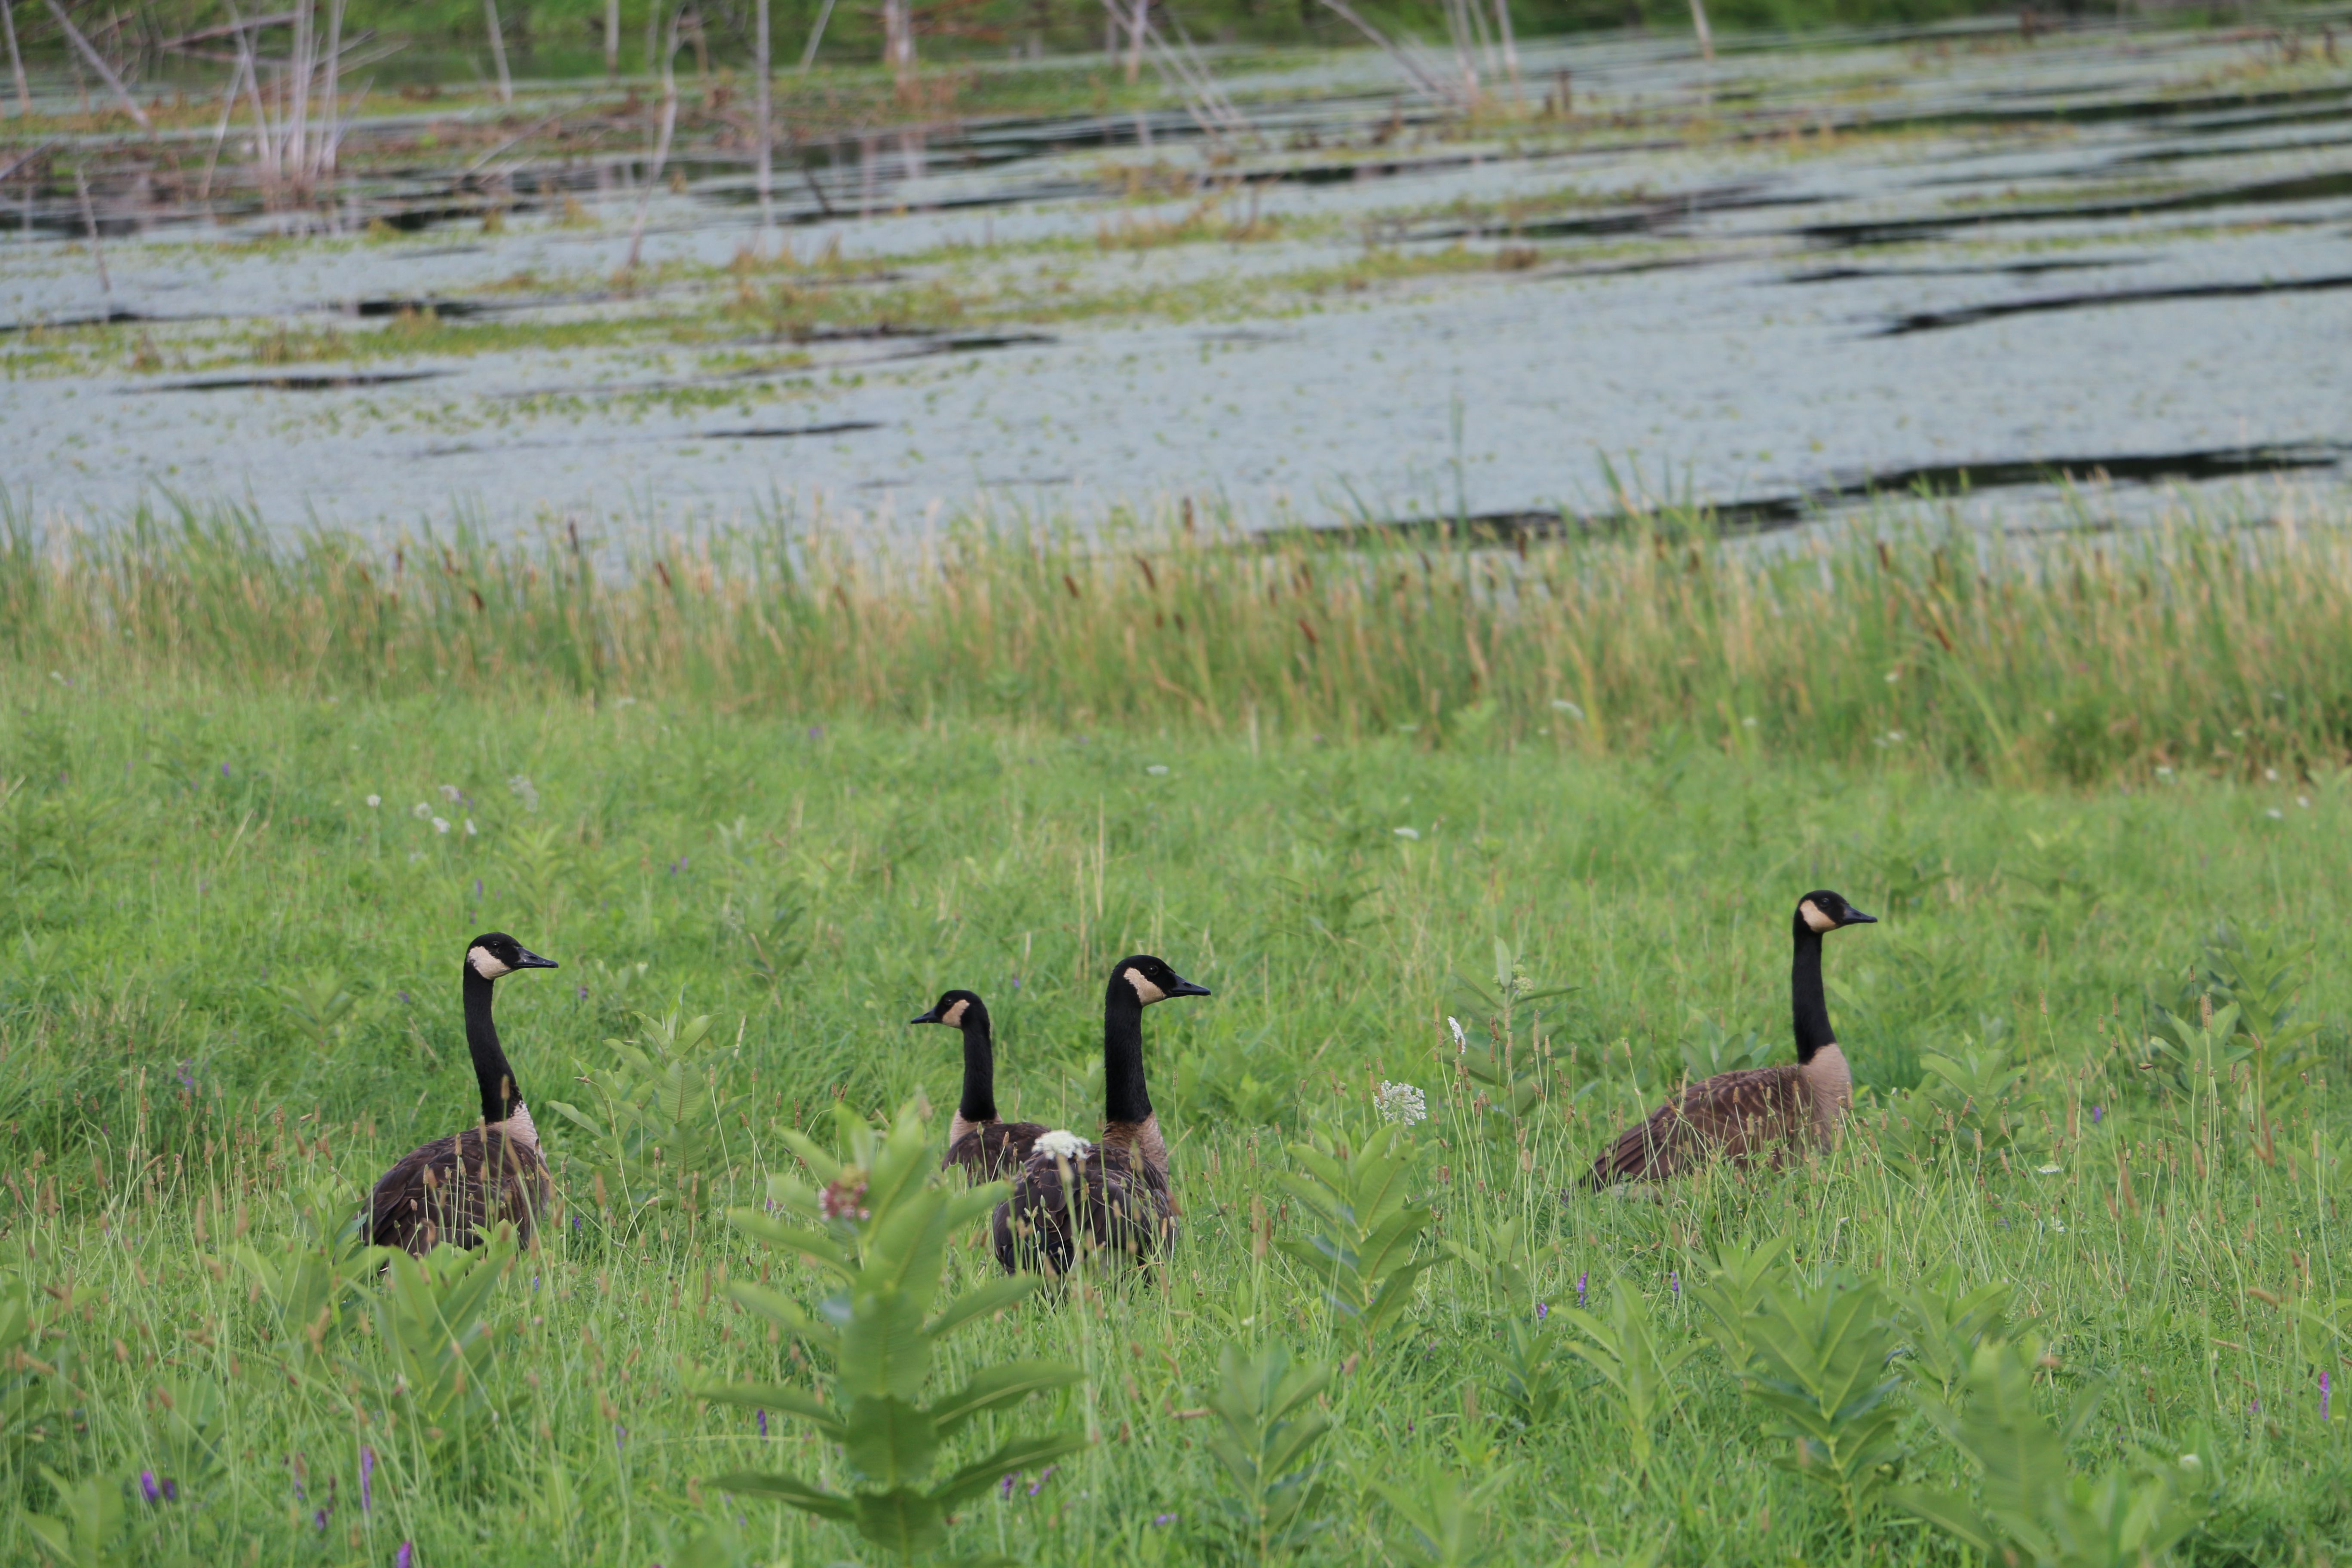 Four Canadian Geese in a field, wetland area in the background